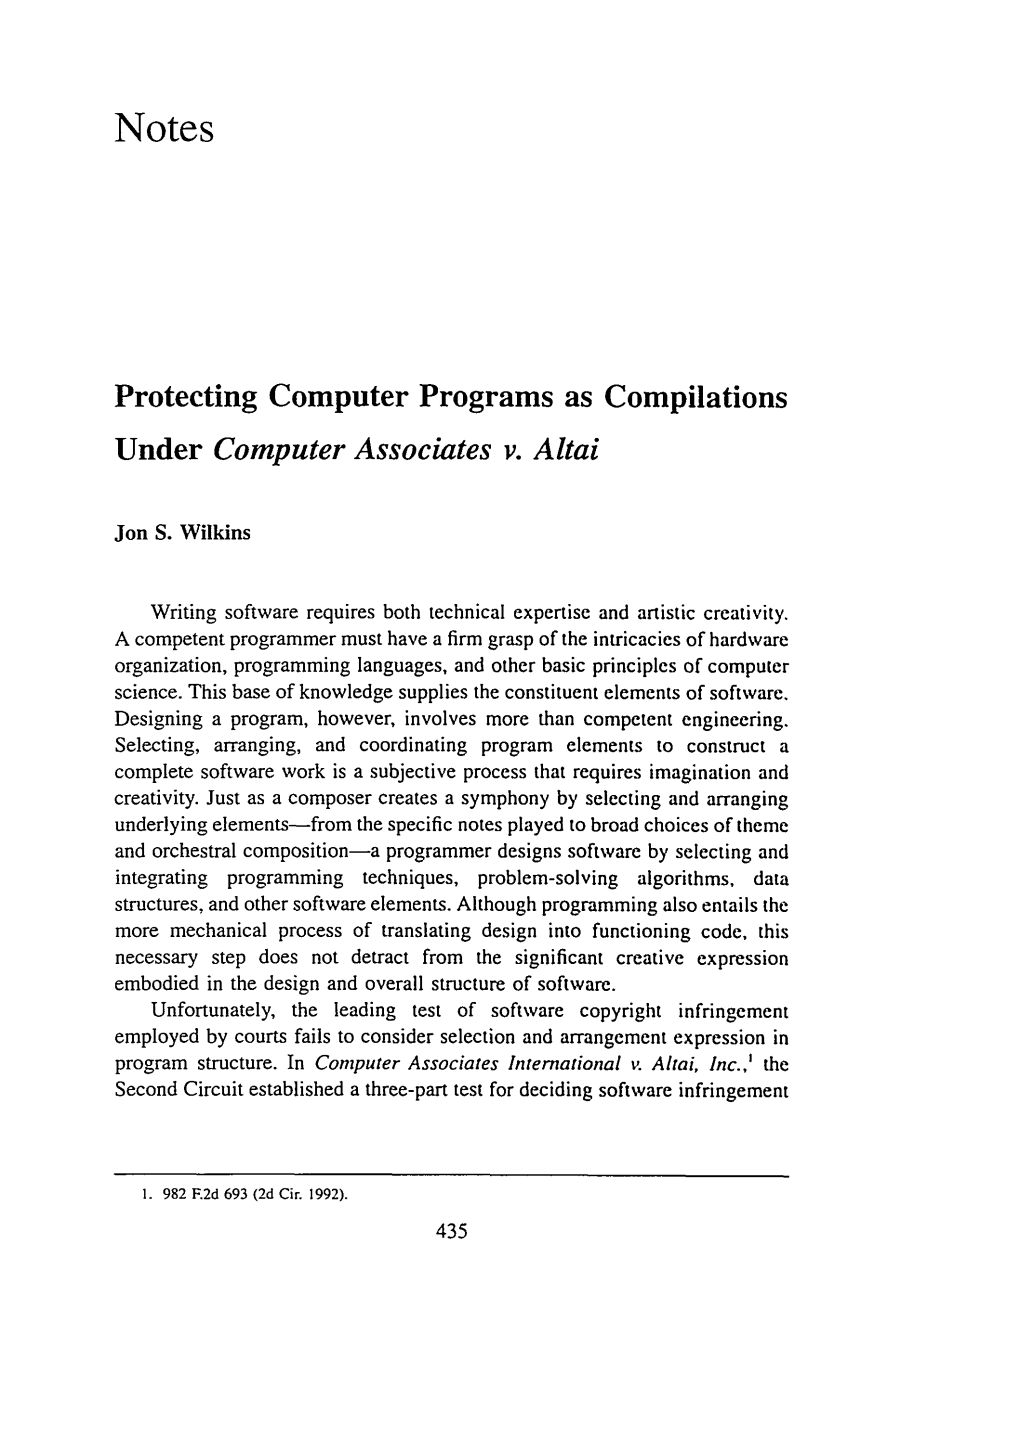 Protecting Computer Programs As Compilations Under Computer Associates V